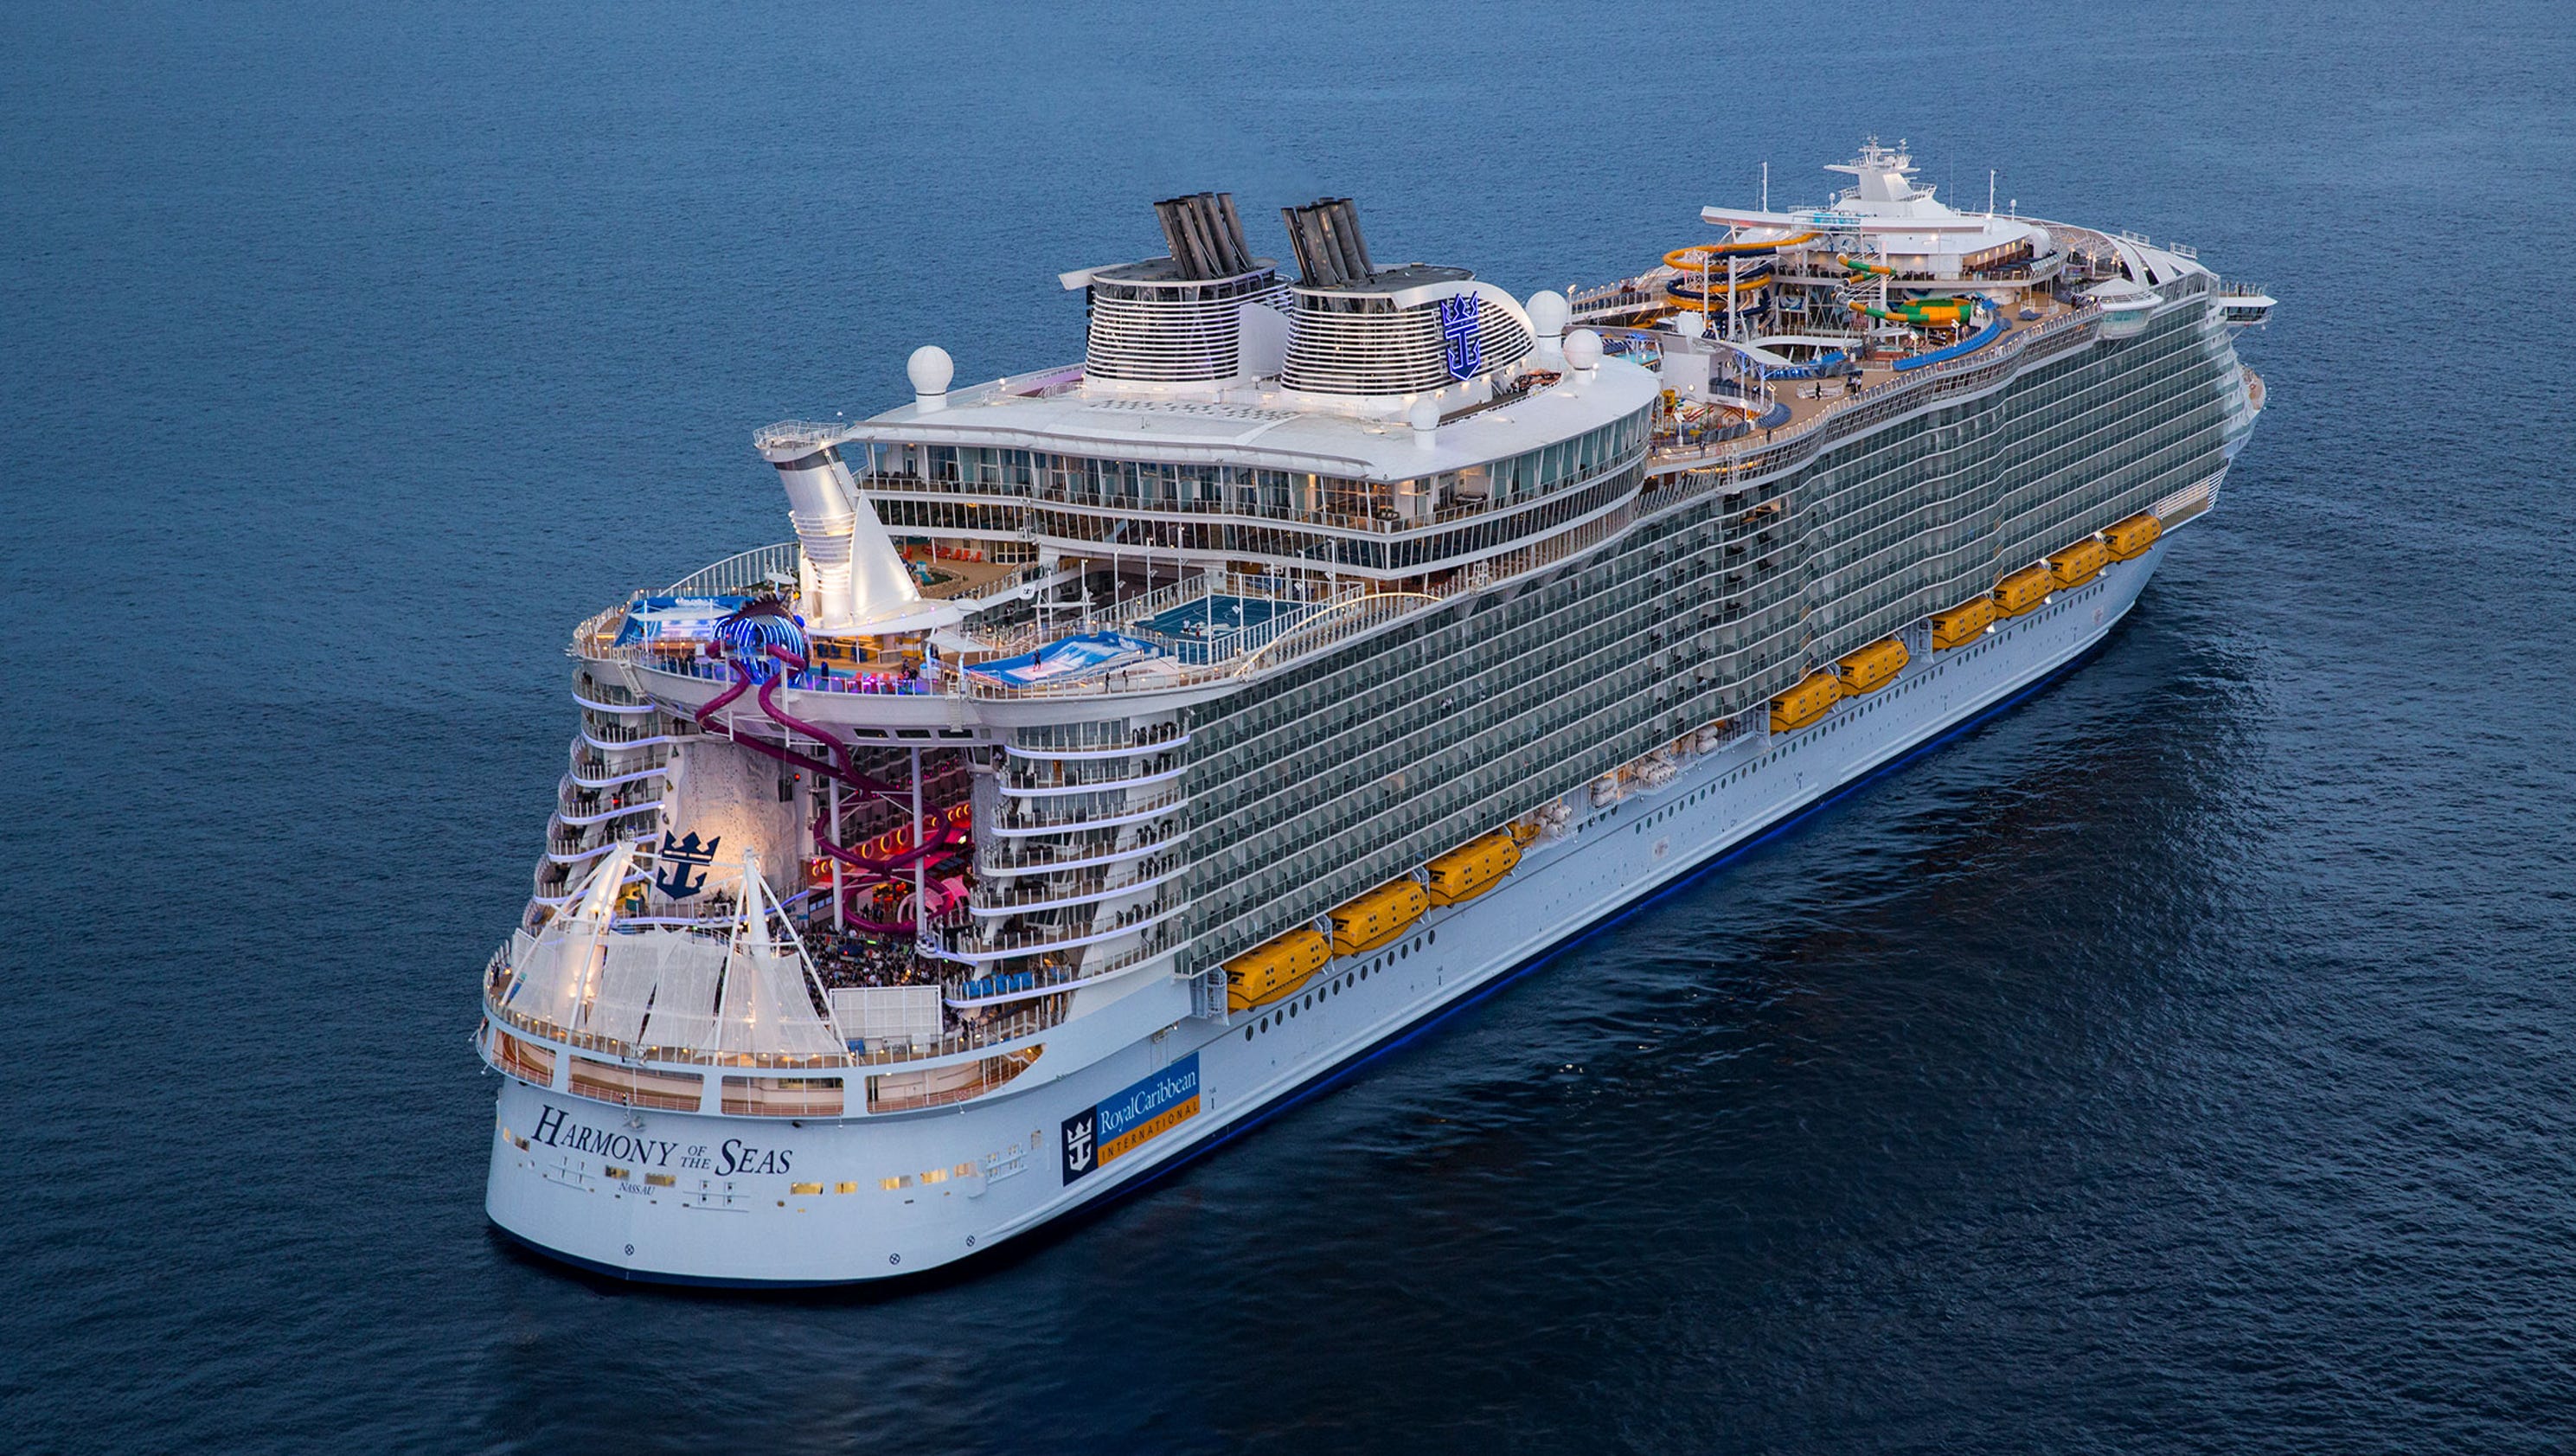 Symphony of the Seas: New cruise ships for 2018